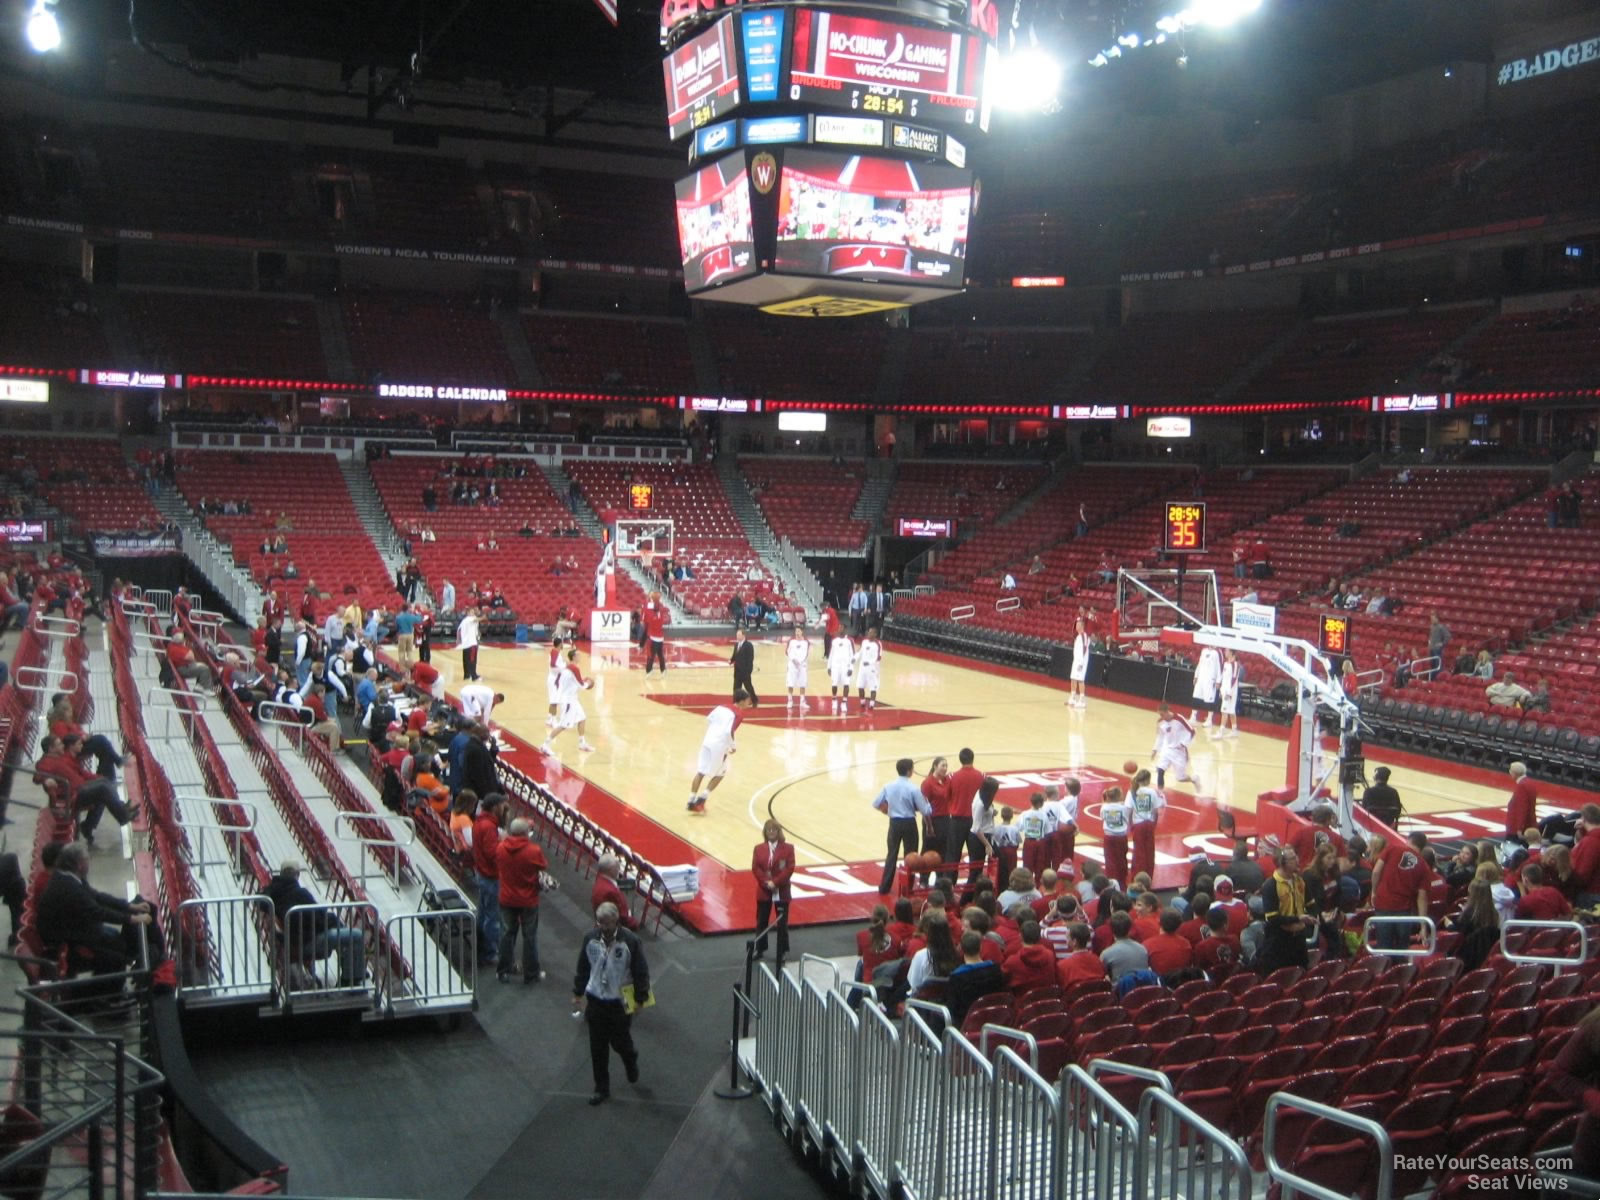 section 117 seat view  - kohl center